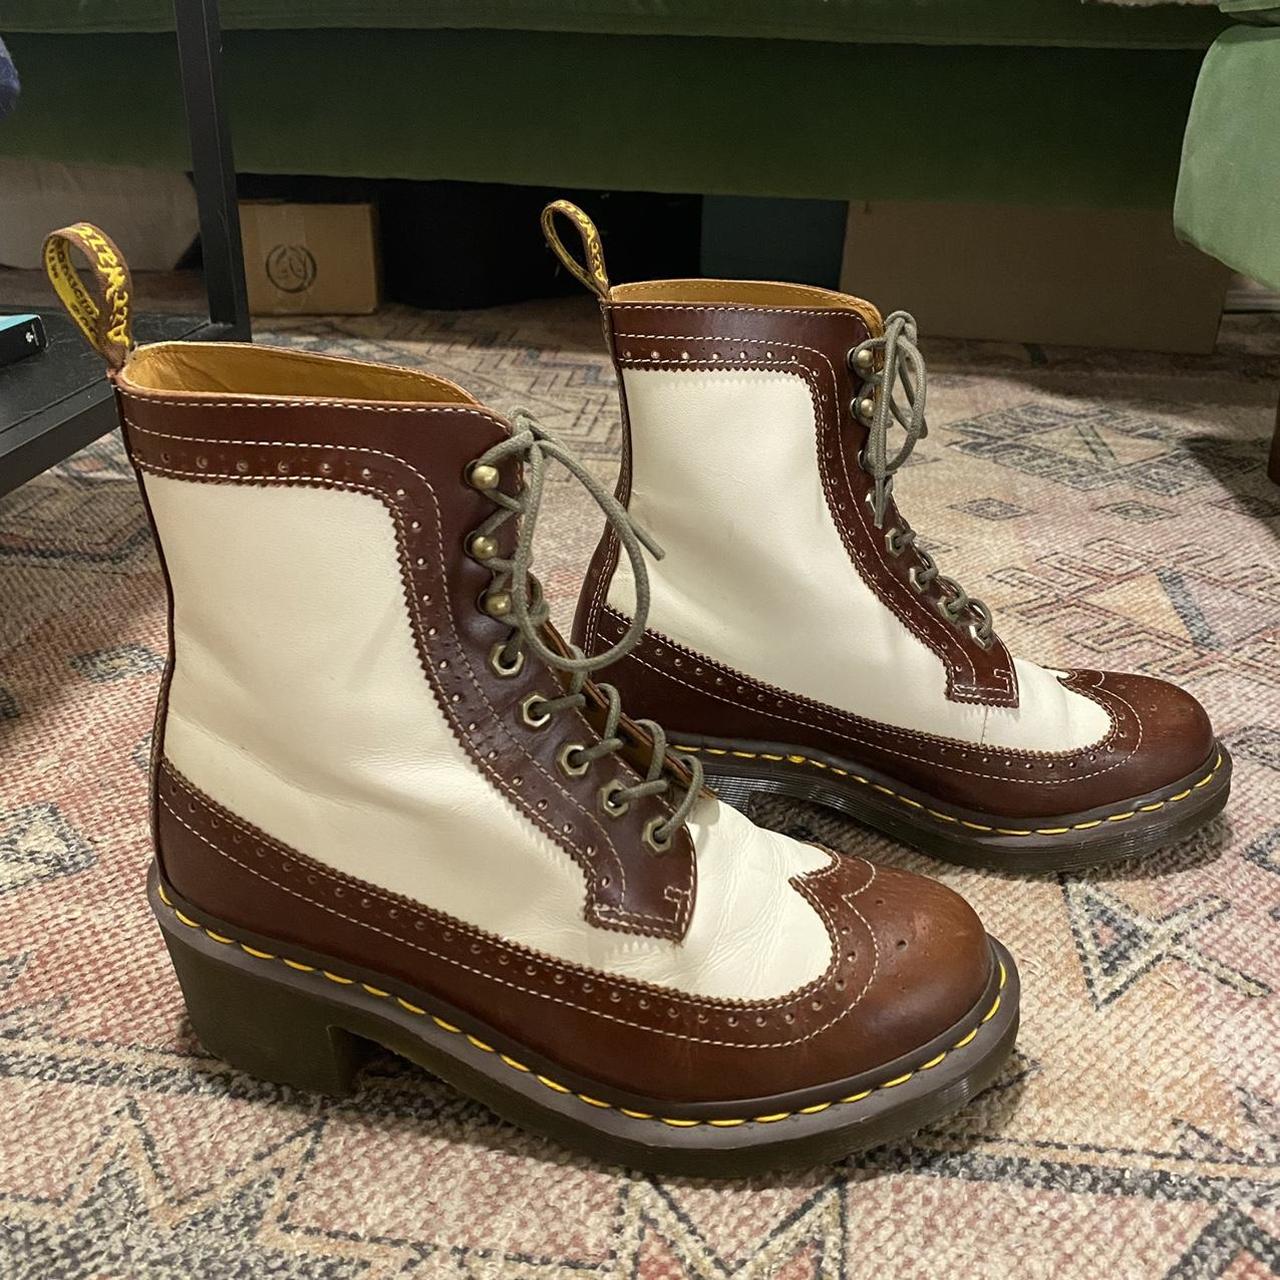 Dr. Martens Women's Brown and White Boots (2)